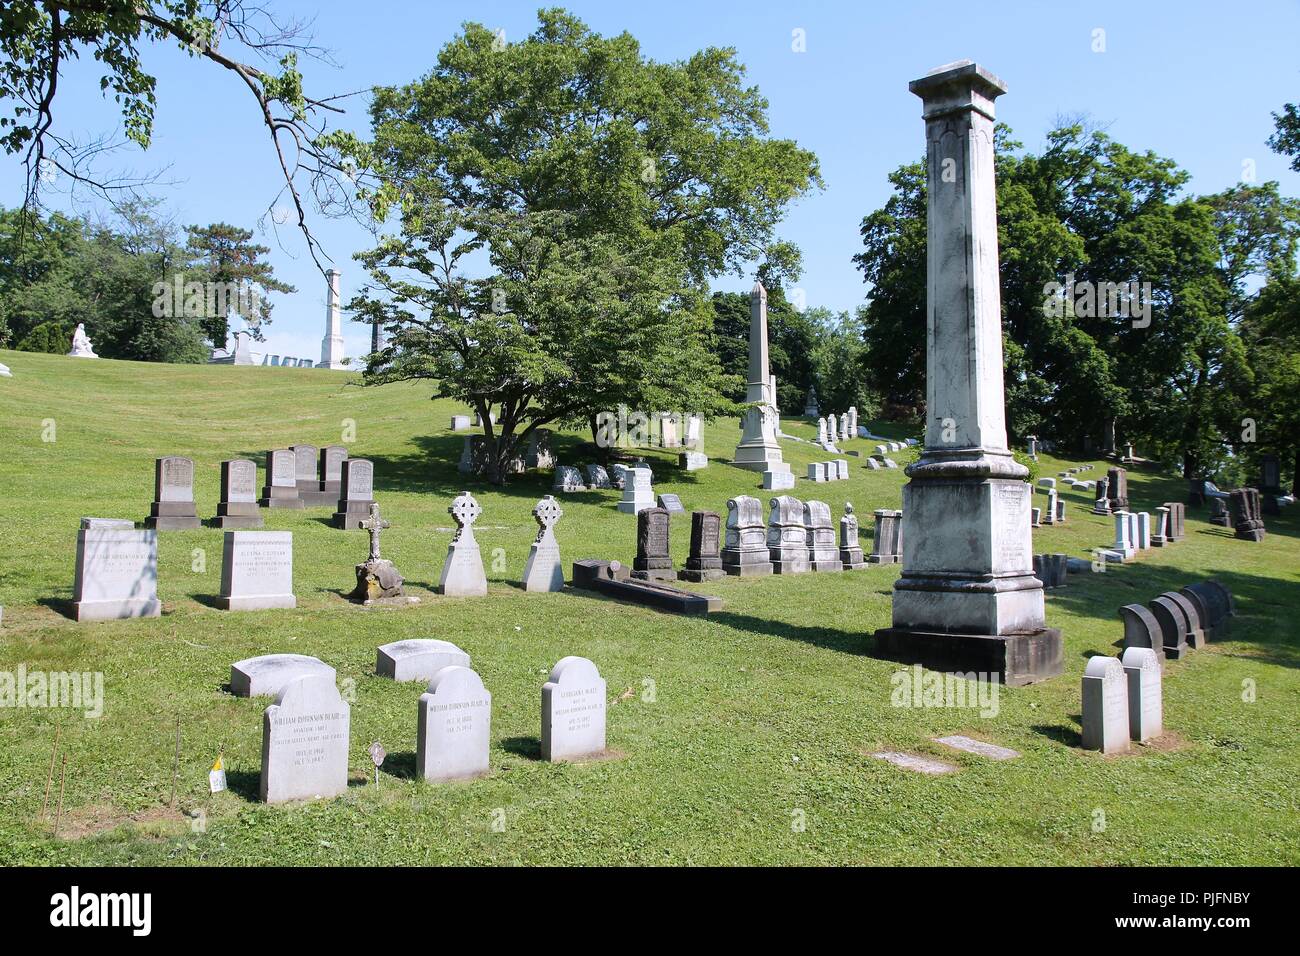 PITTSBURGH, USA - JUNE 30, 2013: Allegheny Cemetery in Pittsburgh, Pennsylvania, USA. It dates back to 1844 and covers 300 acres of land. Stock Photo